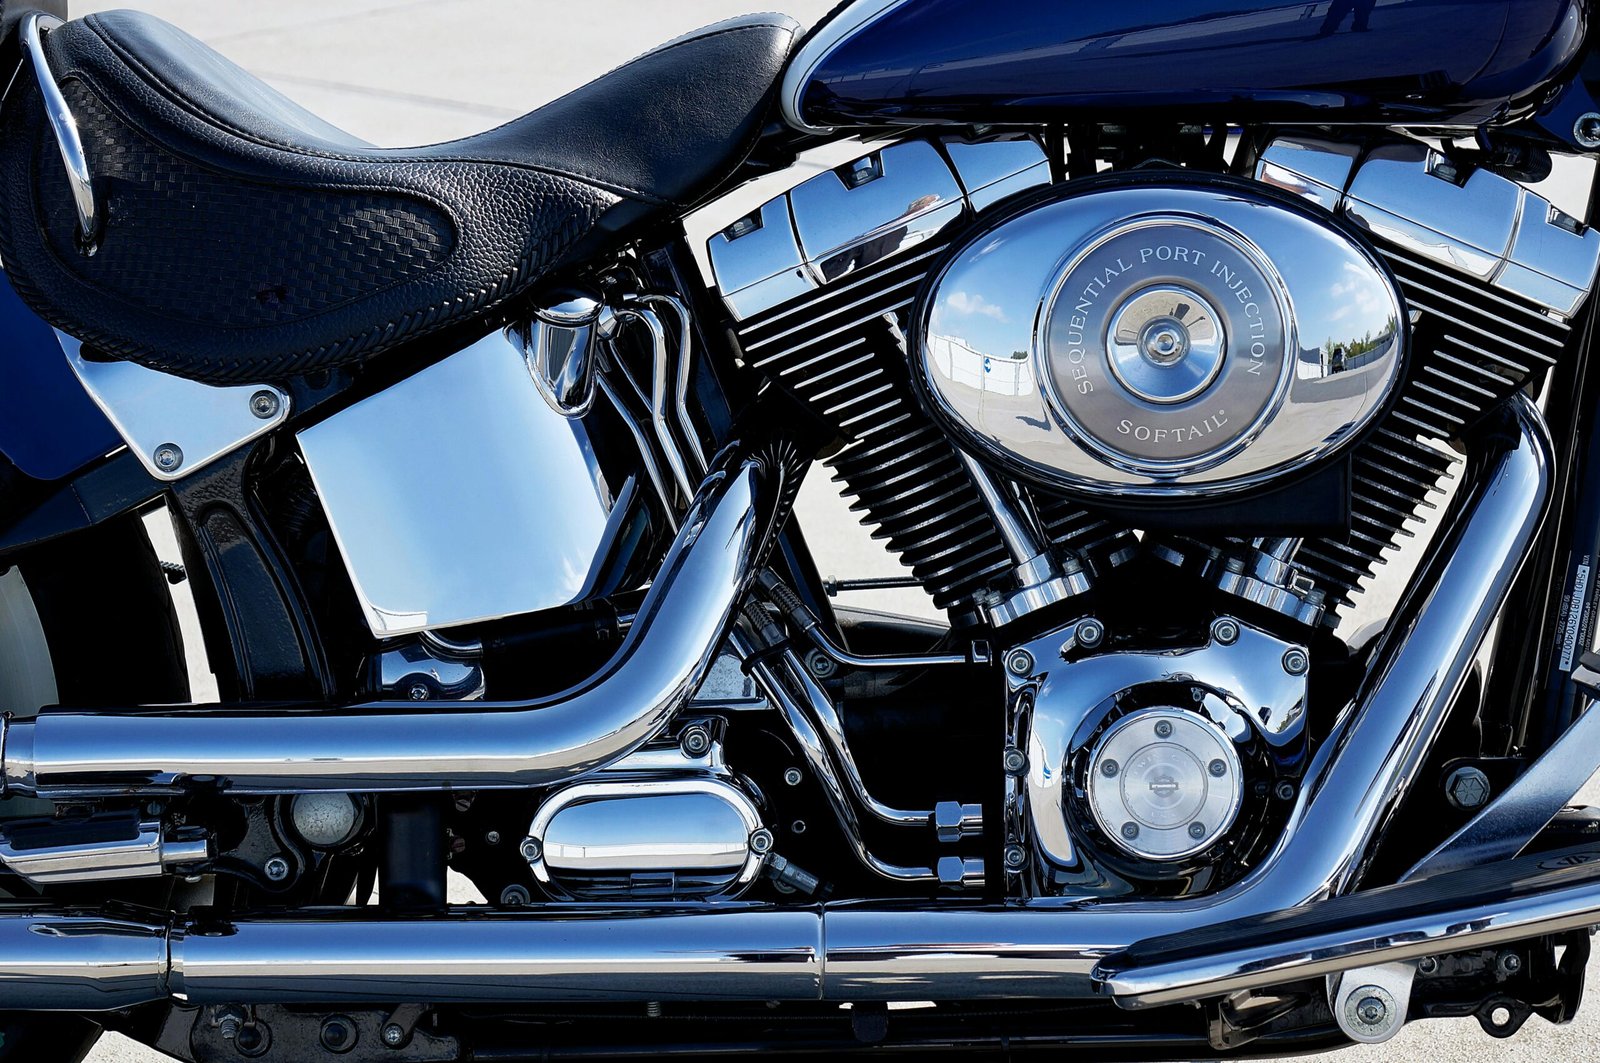 Revamp Your Ride: Best Decal Designs for Motorcycles